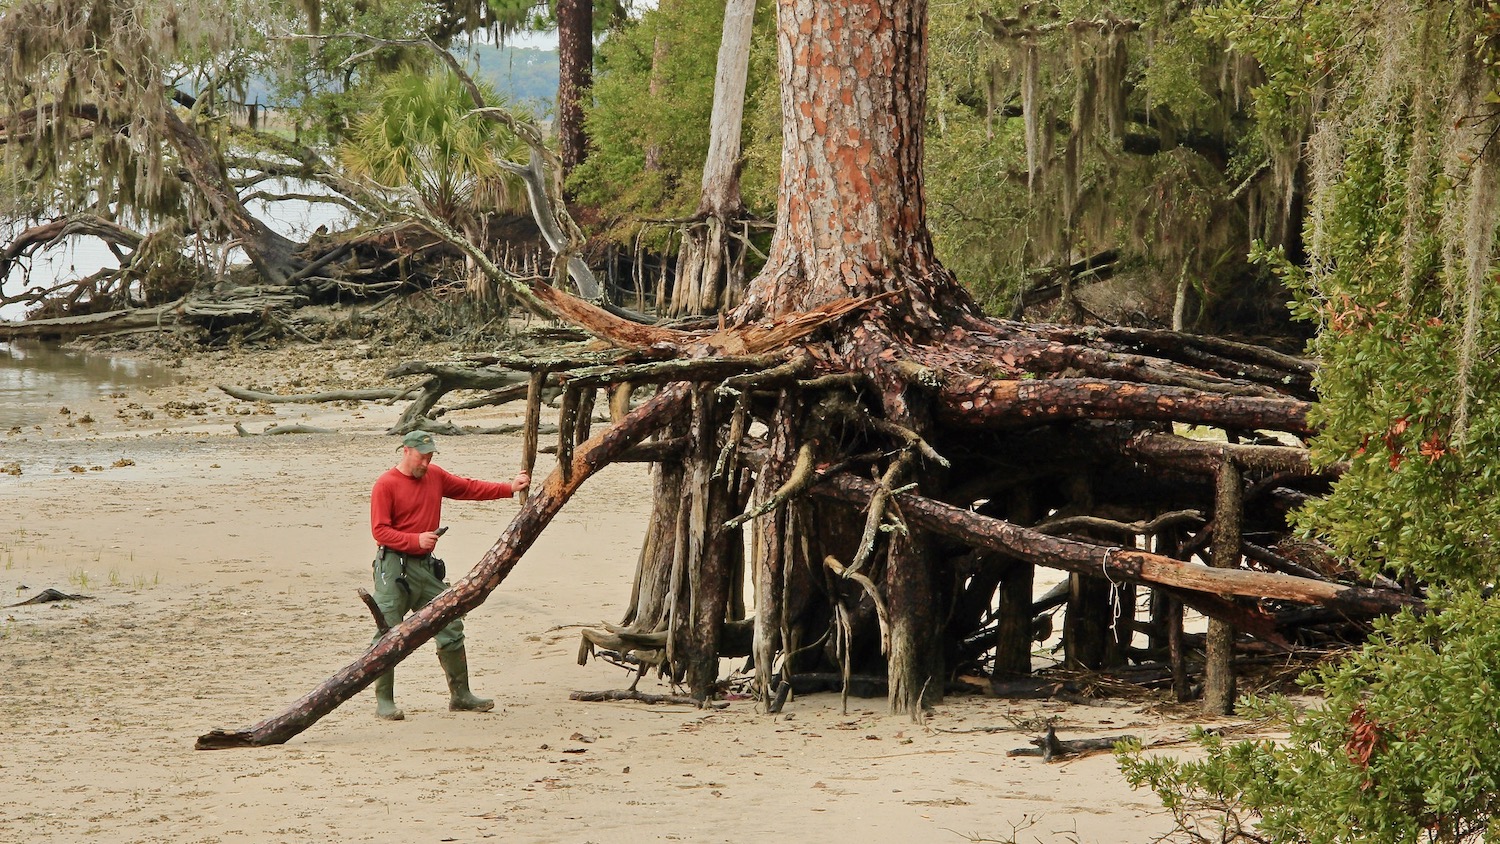 A person stands next to the exposed roots of a large cedar tree on a beach.